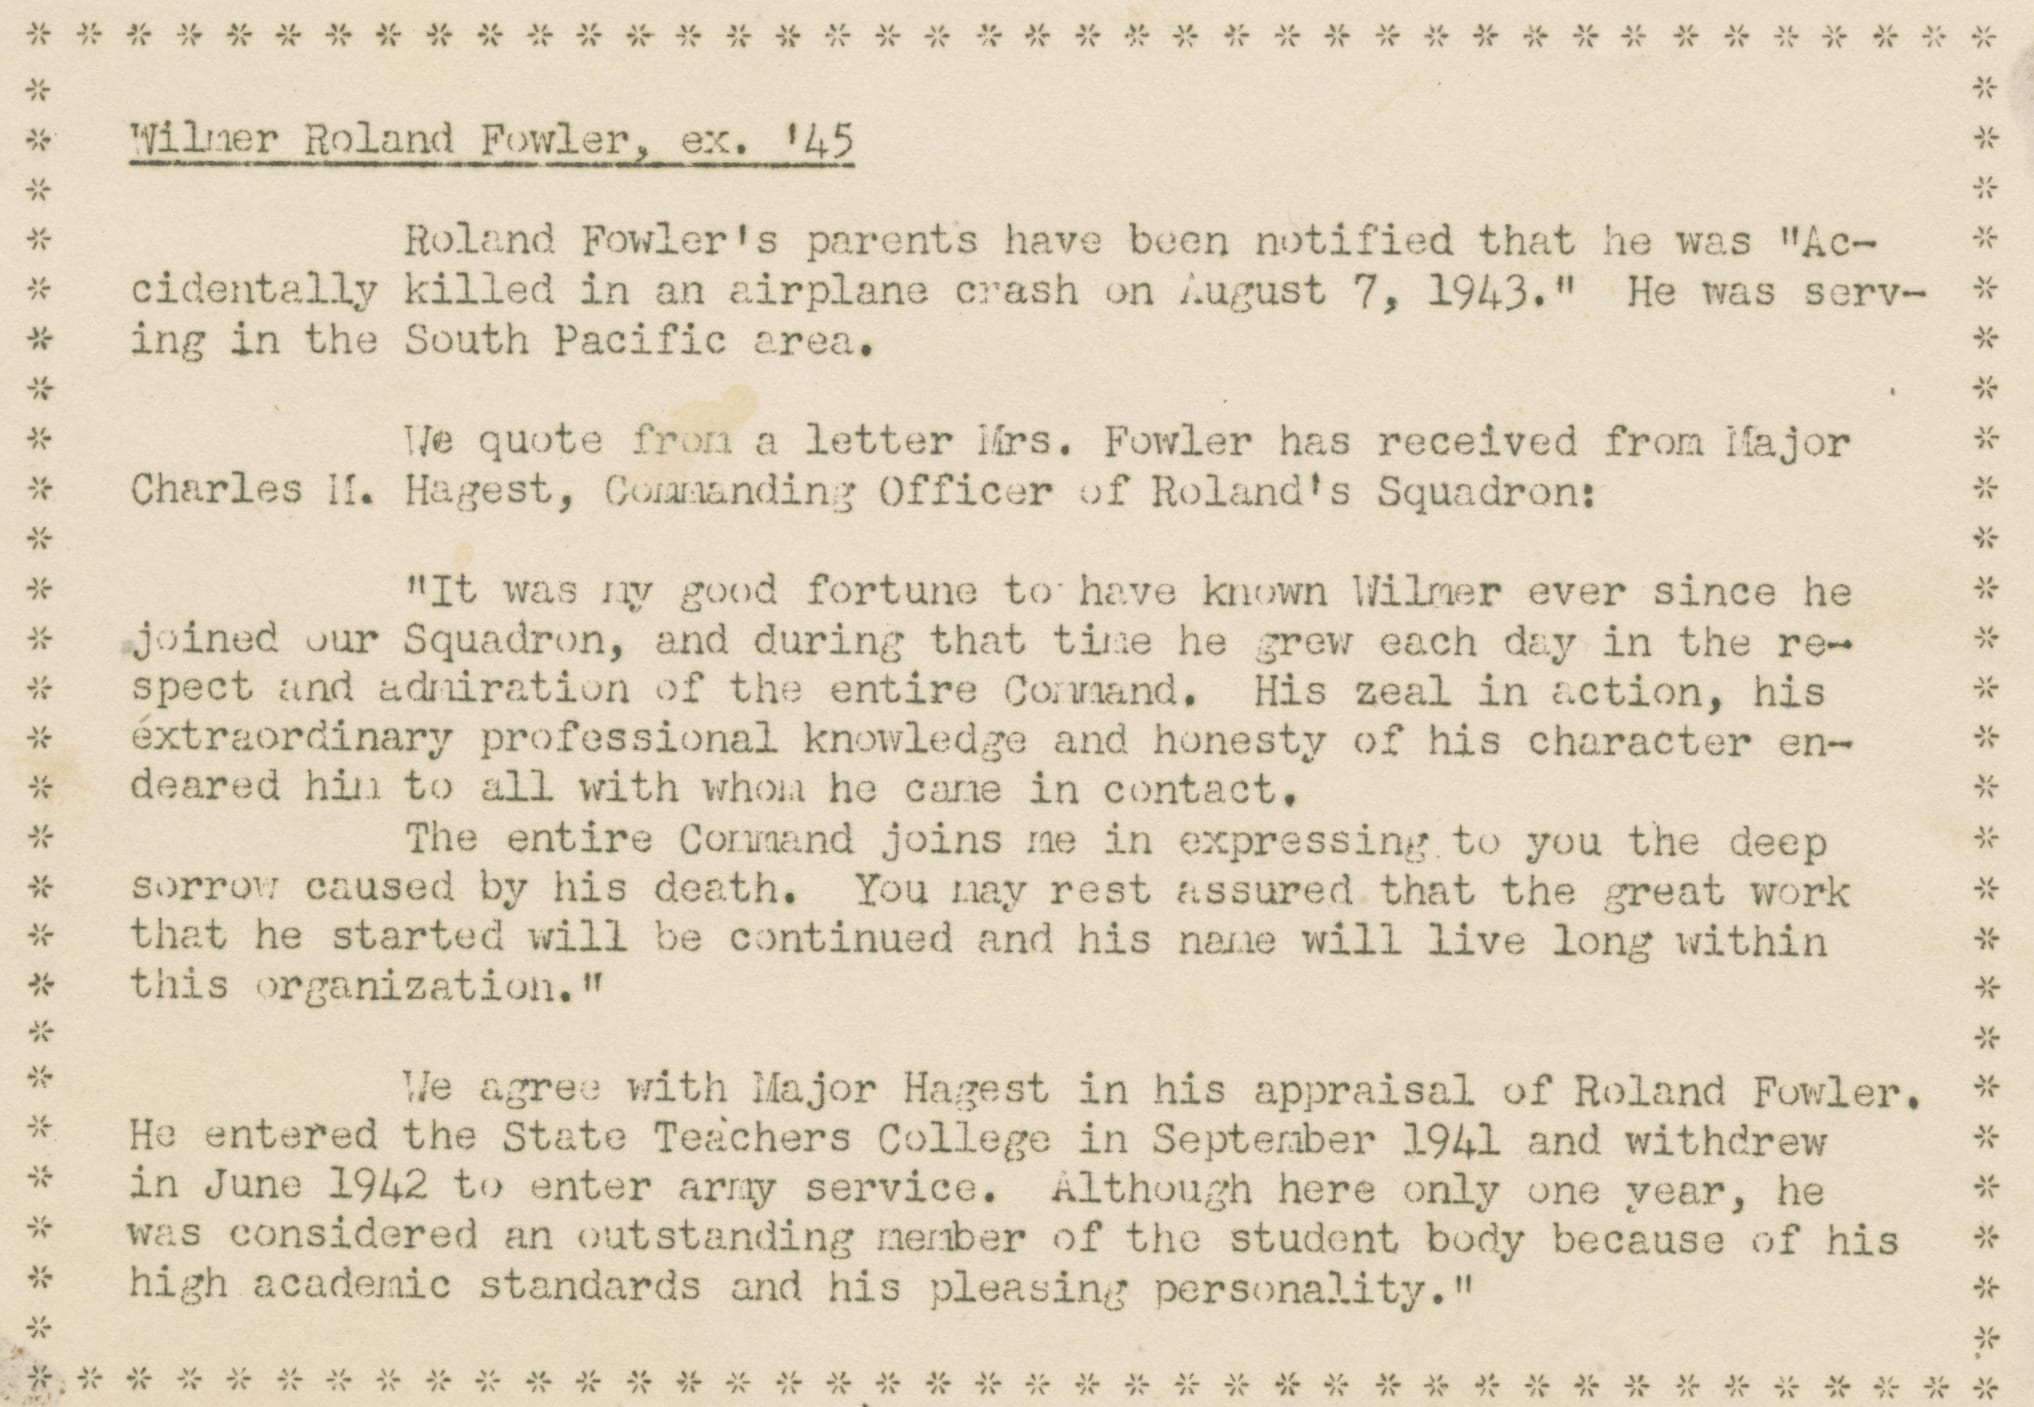 Image from newsletter. It reads: Wilmer Roland Fowler, ex. '45. Roland Fowler's parents have been notified that he was "Accidentally killed in an airplane crash on August 7, 1943." He was serving in the South Pacific area. We quote from a letter Mrs. Fowler received from Charles M. Hagest, Commanding Officer of Roland's Squadron: "It was my good fortune to have known Wilmer ever since he joined our Squadron, and during that time he grew each day in the respect and admiration of the entire Command. His zeal in action, his extraordinary professional knowledge and honesty of his character endeared him to all with whom he came in contact. The entire Command joins me in expressing to you the sorrow caused by his death. You may rest assured that the great work that he started will be continued and his name will live long within this organization." We agree with Major Hagest in his appraisal of Roland Fowler. He entered the State Teachers College in September 1941 and withdrew in June 1942 to enter army service. Although here only one year, he was considered and outstanding member of the student body because of his high academic standards and his pleasing personality.